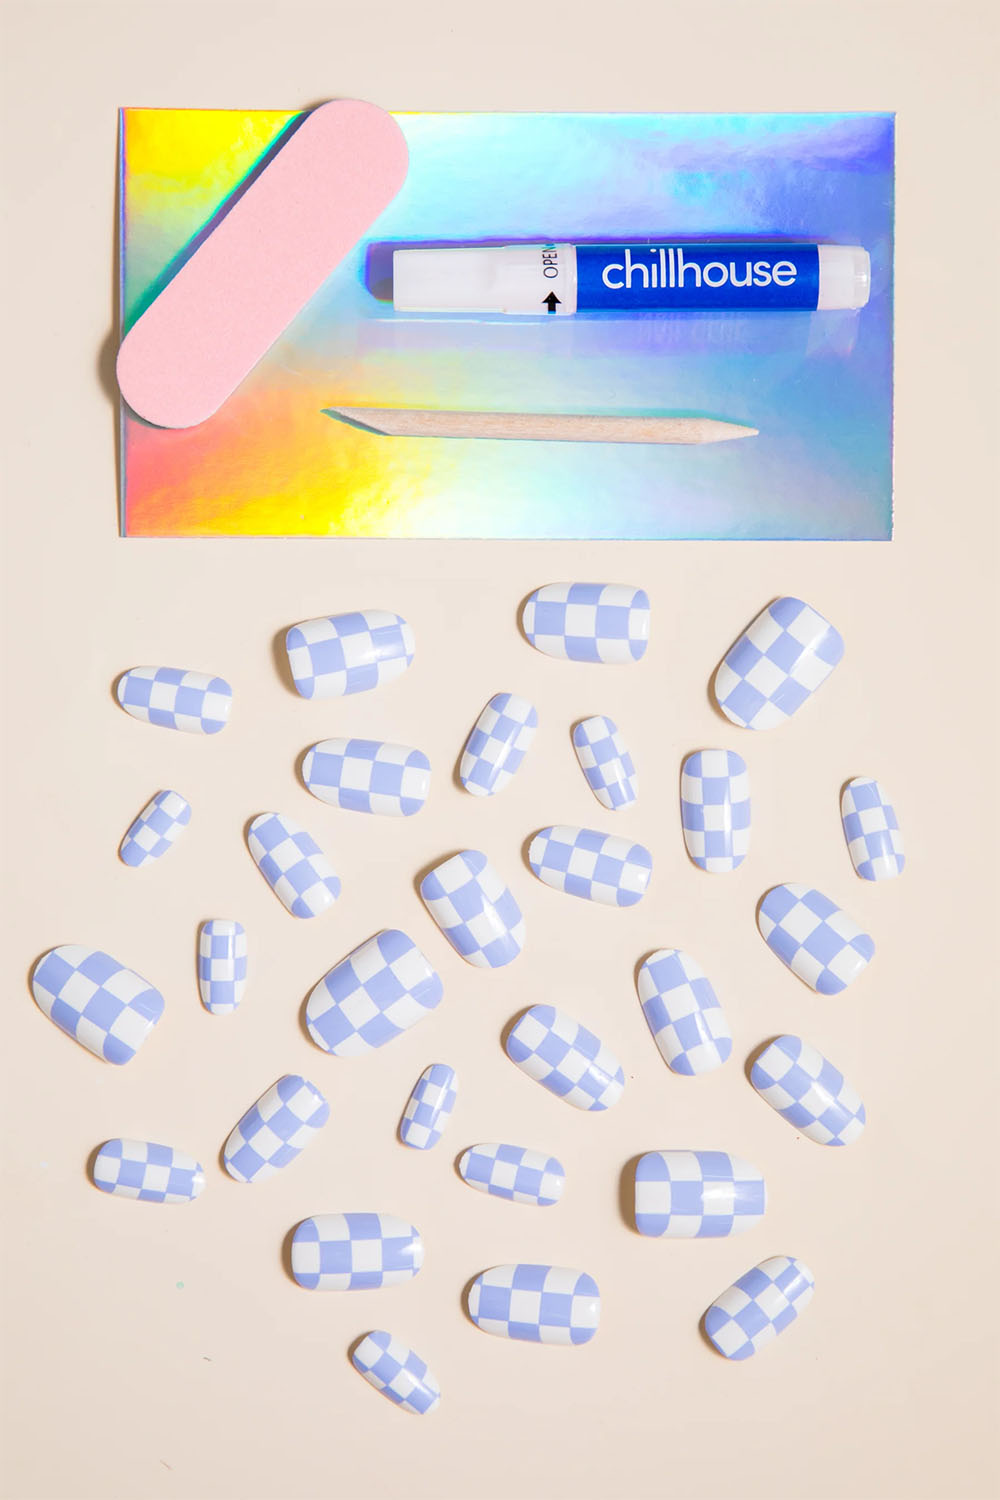 Chillhouse - Chill Tips - Checked Out - Contents